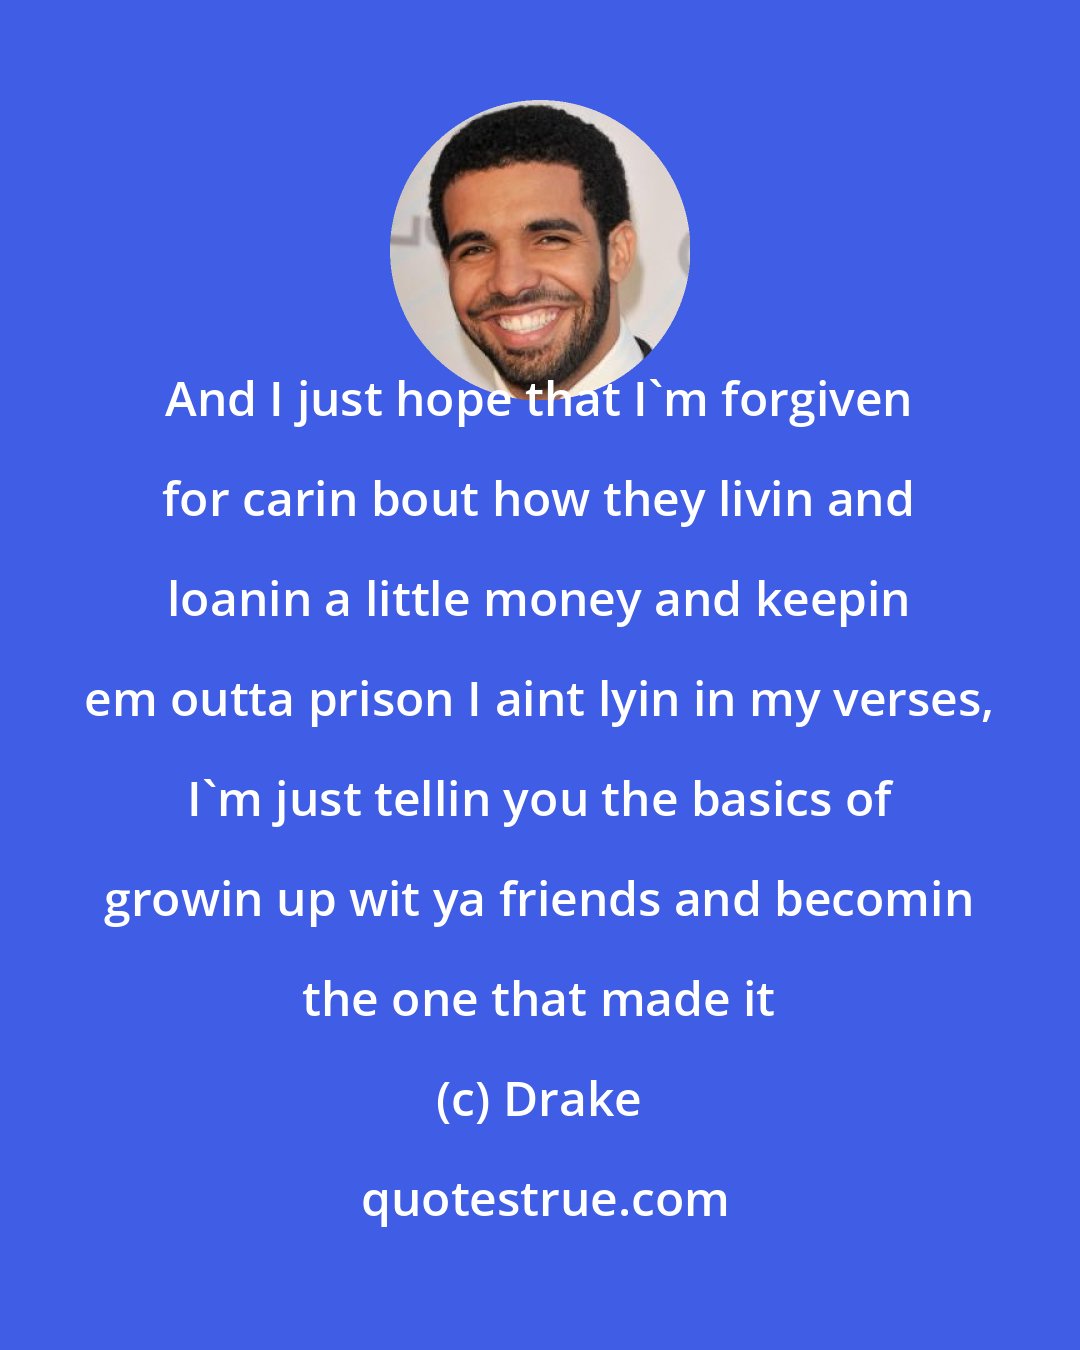 Drake: And I just hope that I'm forgiven for carin bout how they livin and loanin a little money and keepin em outta prison I aint lyin in my verses, I'm just tellin you the basics of growin up wit ya friends and becomin the one that made it